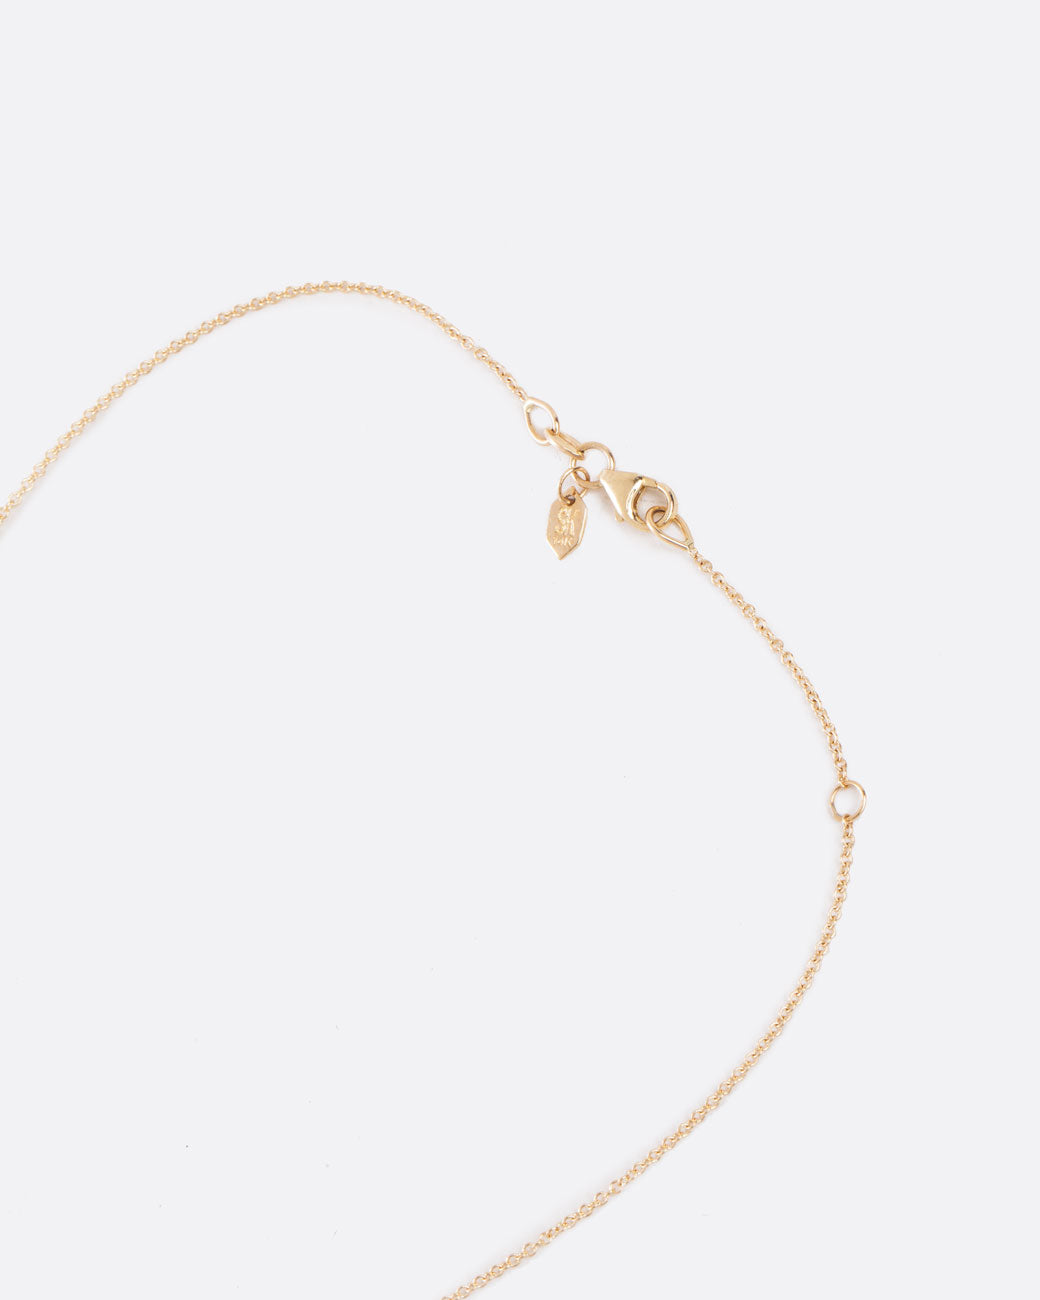 Close up birds eye view of yellow gold chain with closed clasp